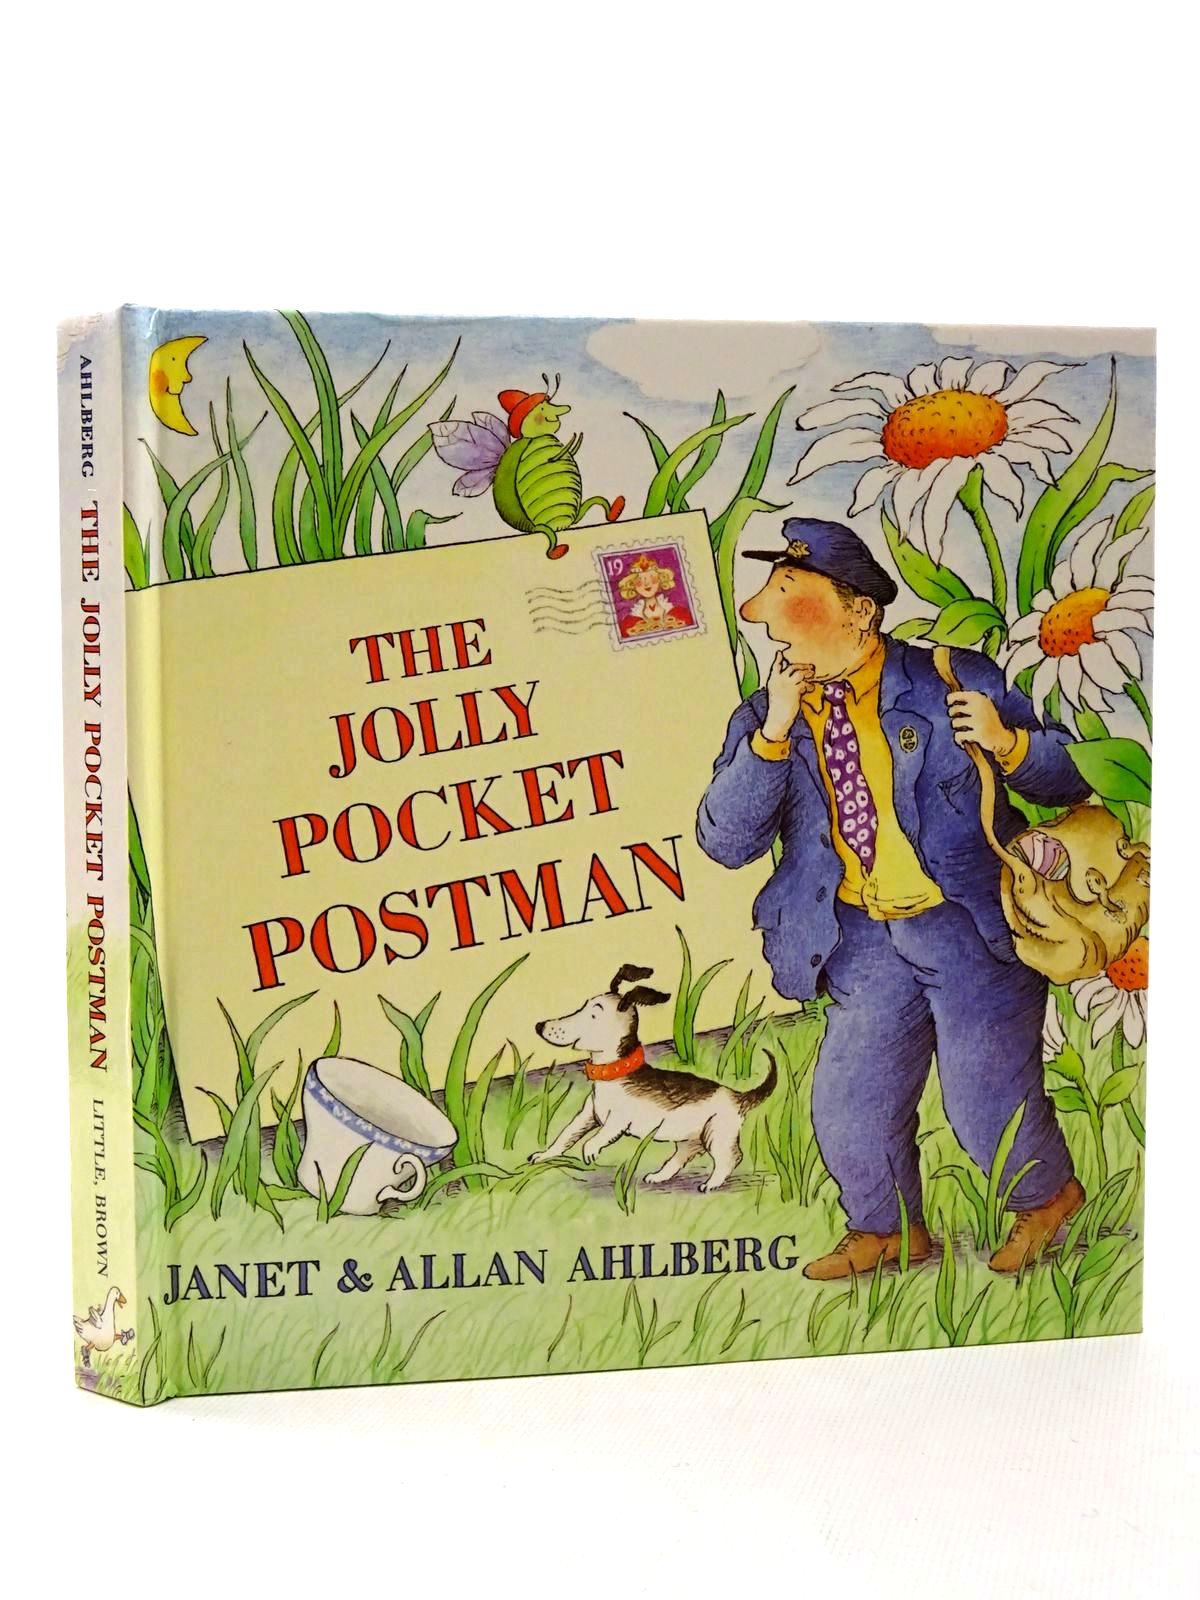 Photo of THE JOLLY POCKET POSTMAN written by Ahlberg, Allan illustrated by Ahlberg, Janet published by Little, Brown (STOCK CODE: 2124373)  for sale by Stella & Rose's Books